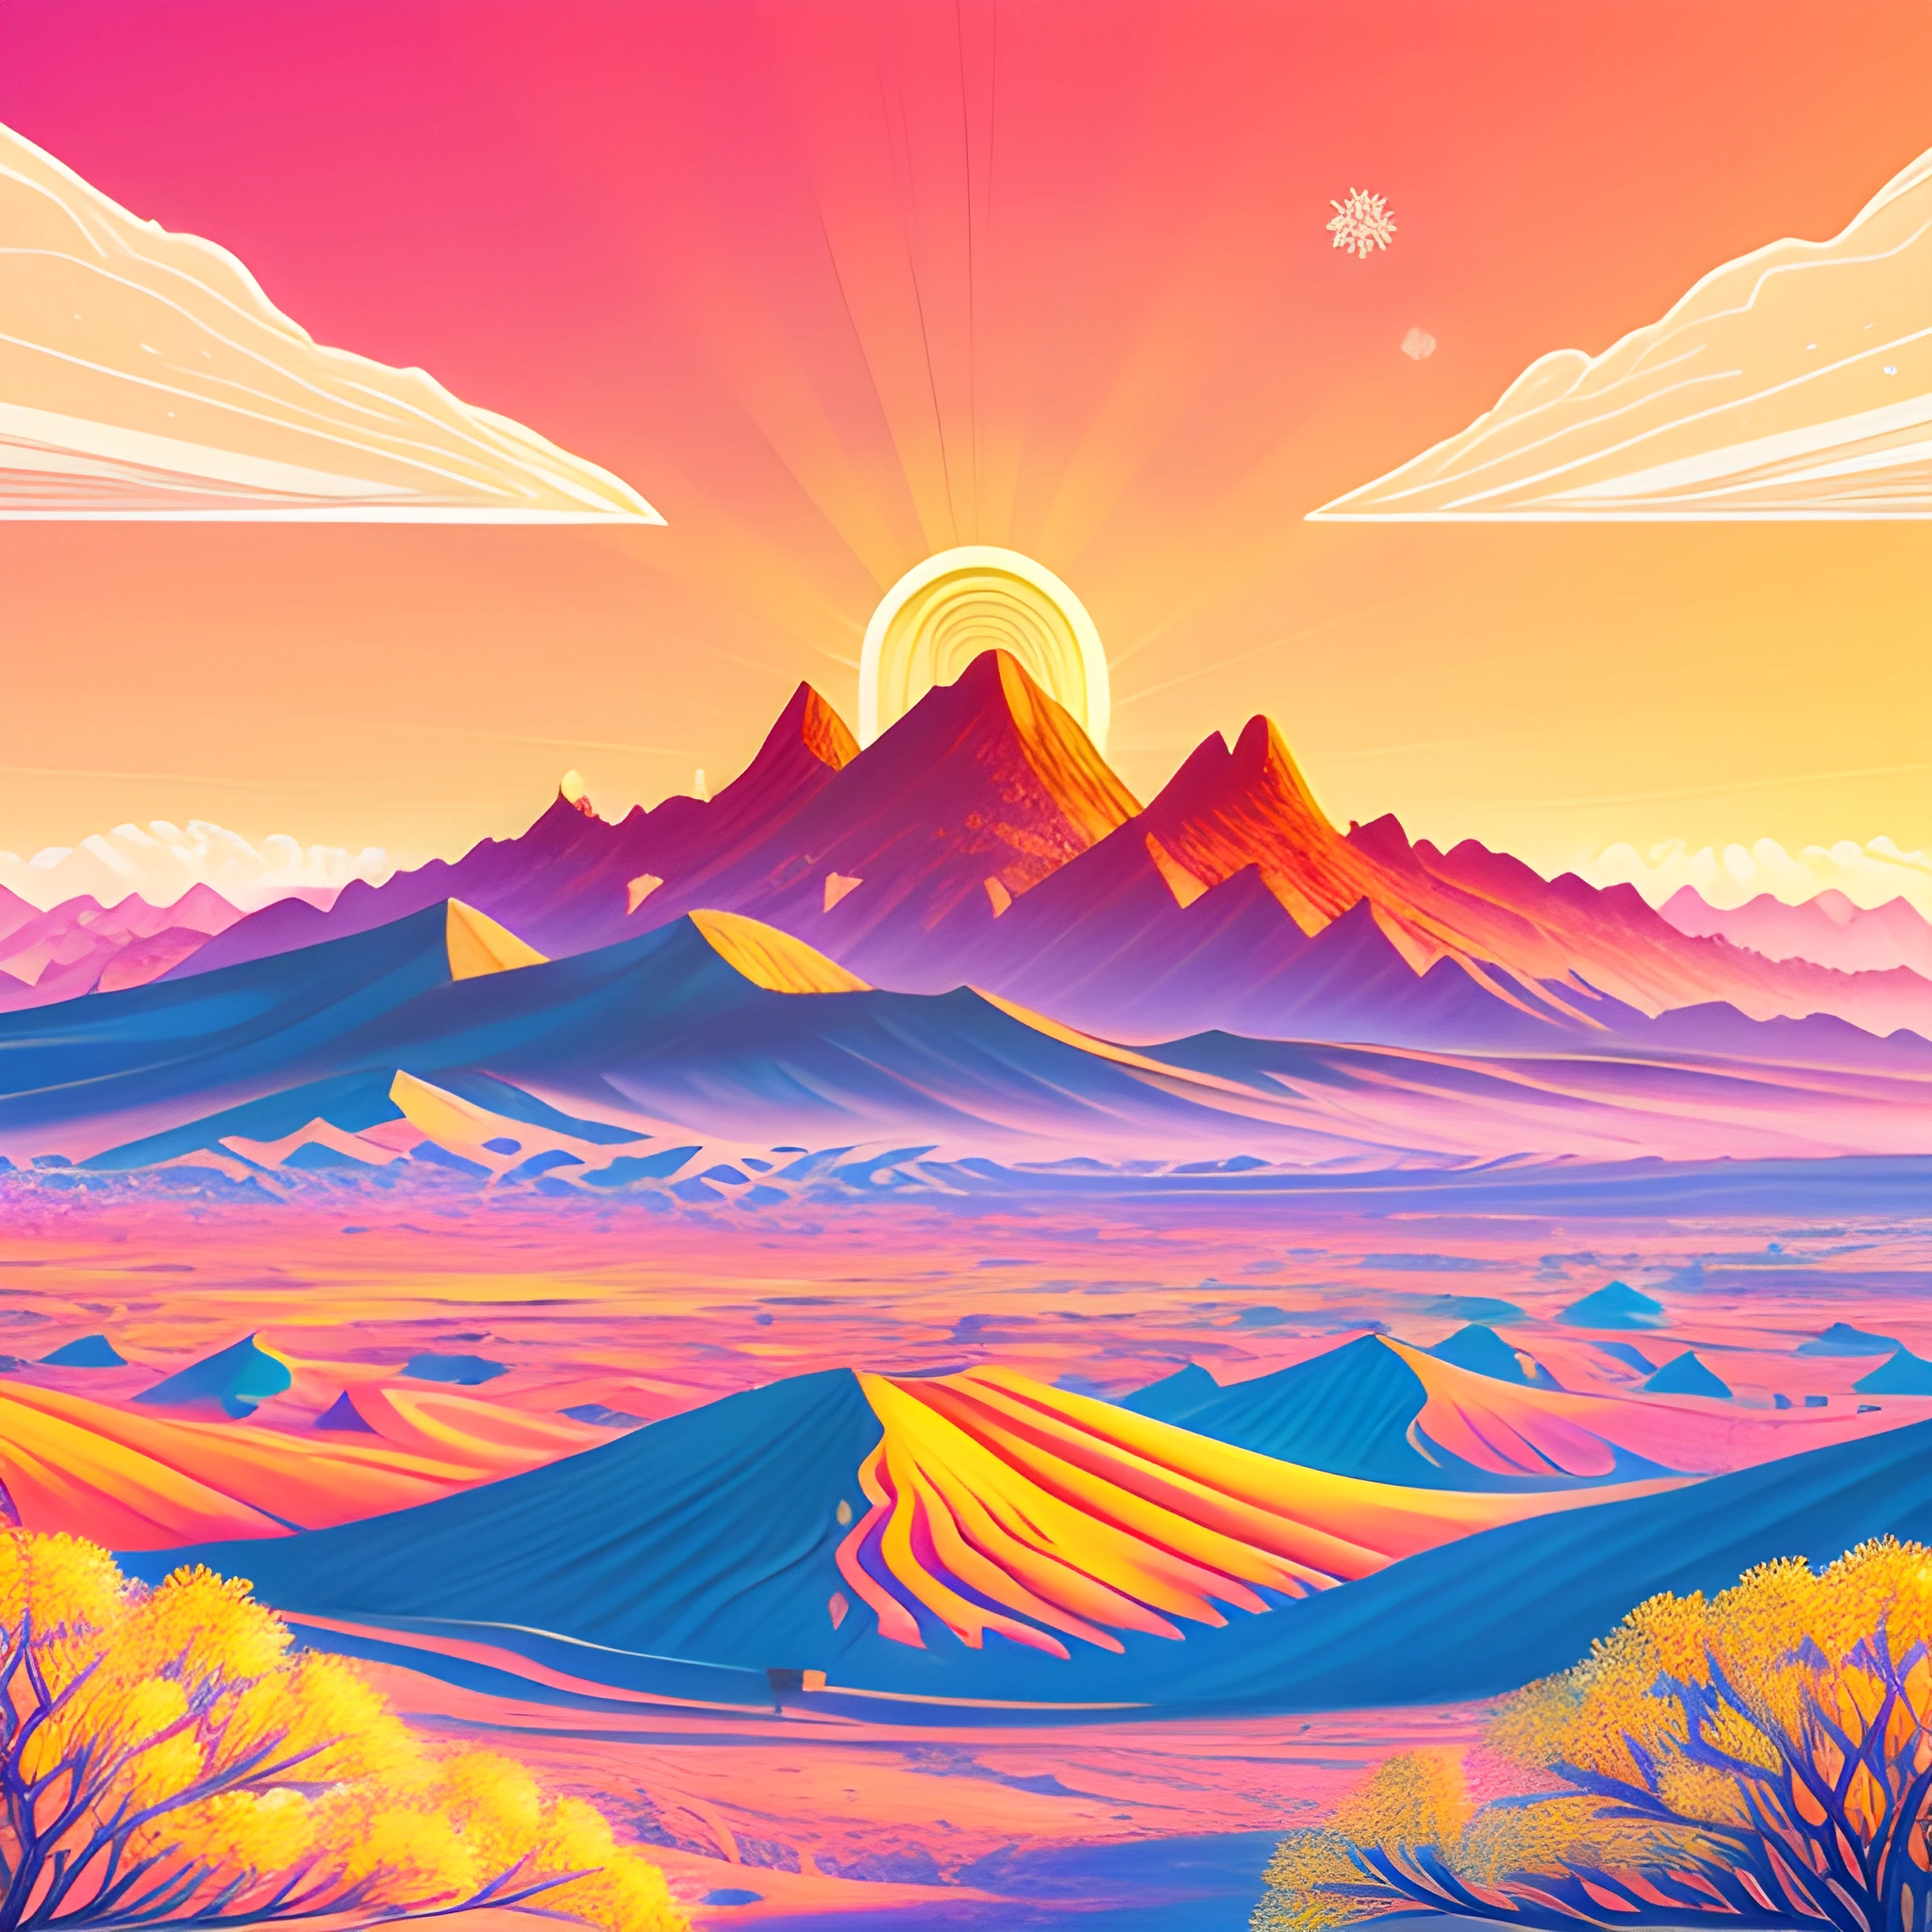 a brightly colored landscape with mountains and trees in the foreground